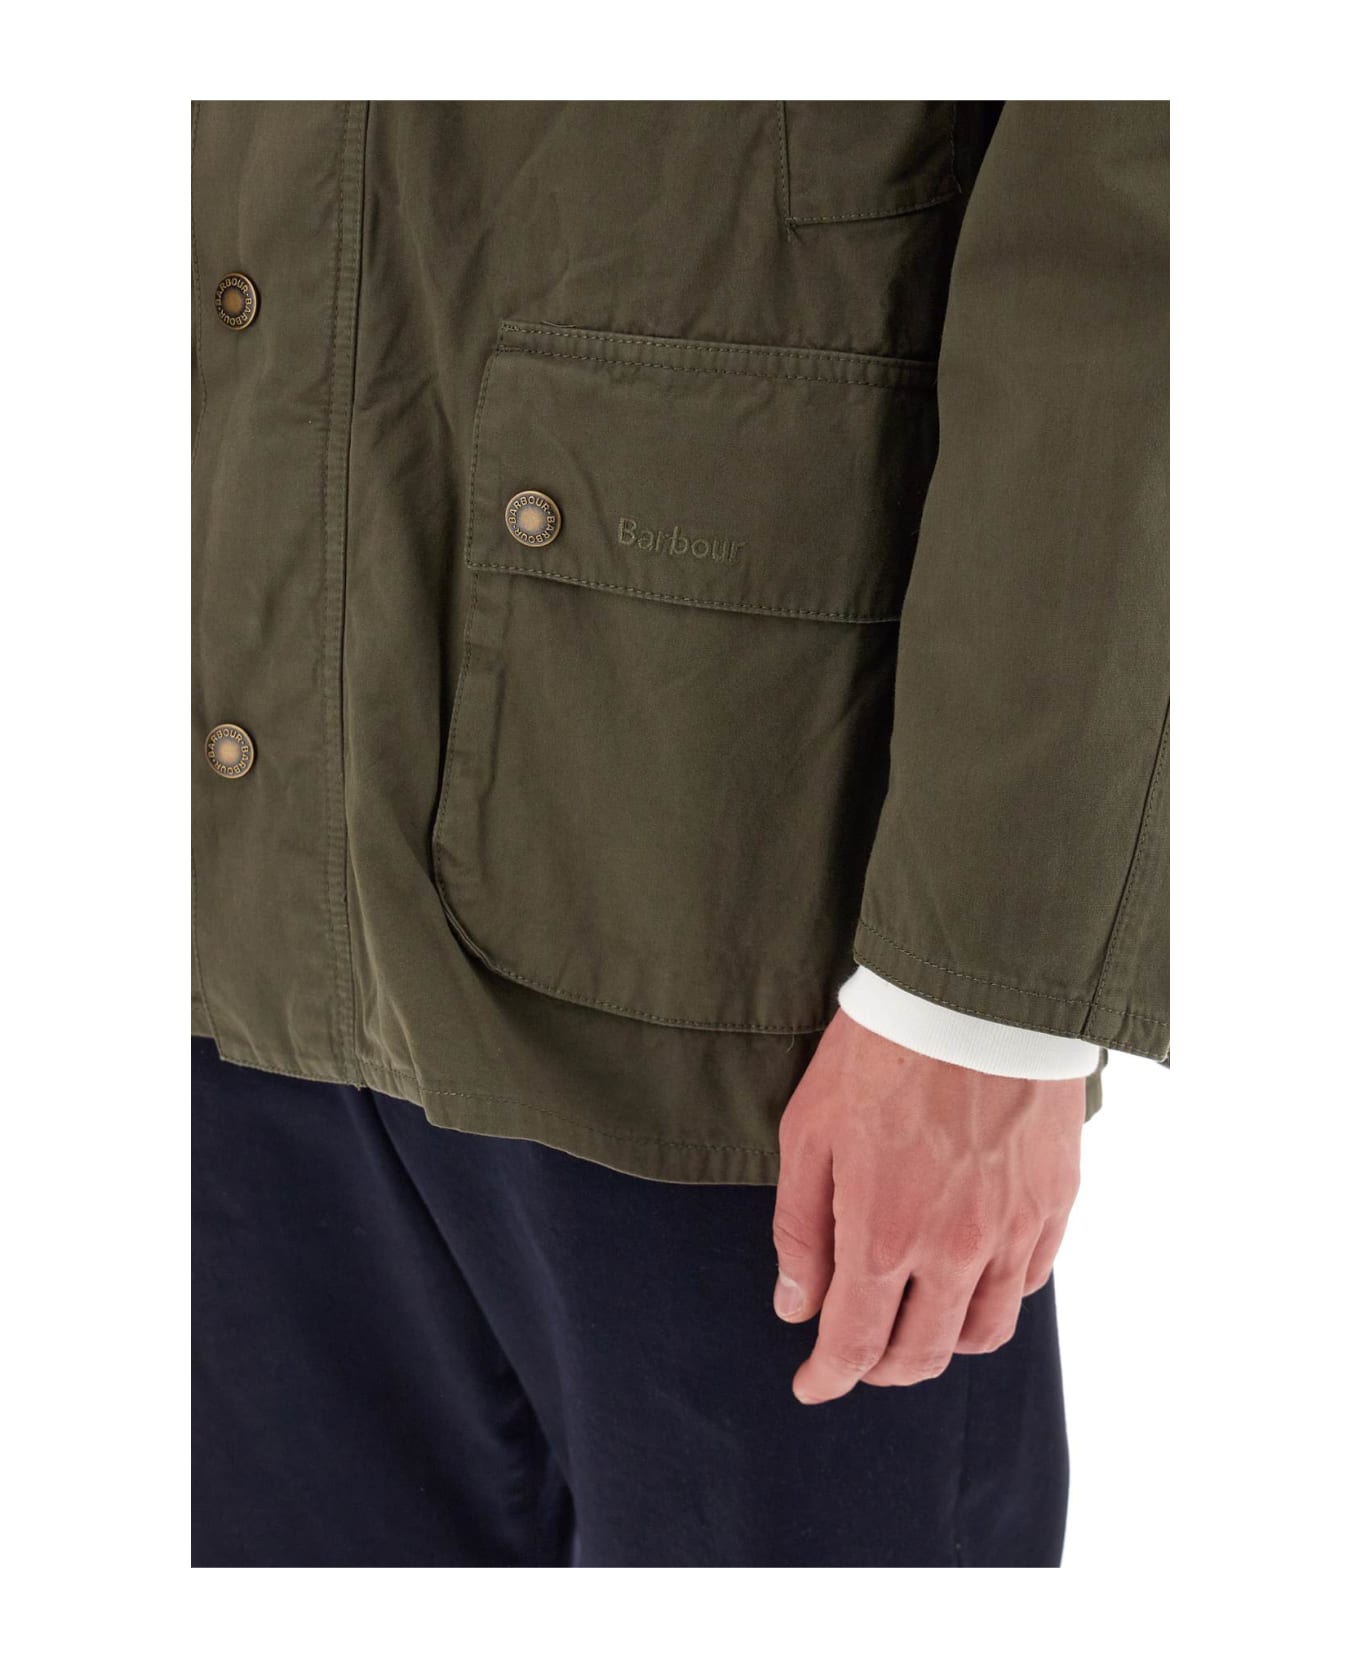 Barbour 'ashby' Casual Jacket - Olive